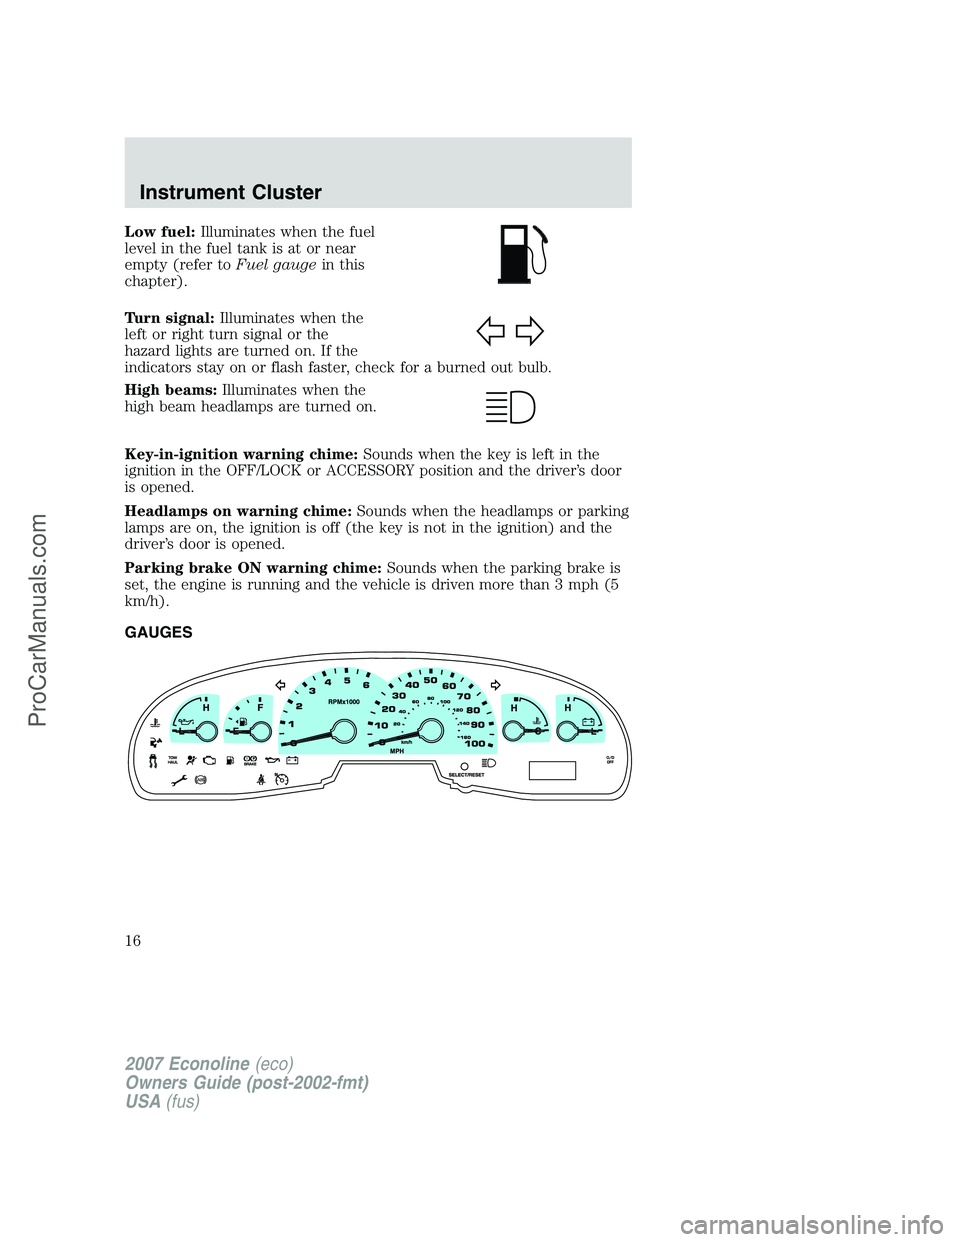 FORD E-250 2007  Owners Manual Low fuel:Illuminates when the fuel
level in the fuel tank is at or near
empty (refer toFuel gaugein this
chapter).
Turn signal:Illuminates when the
left or right turn signal or the
hazard lights are t